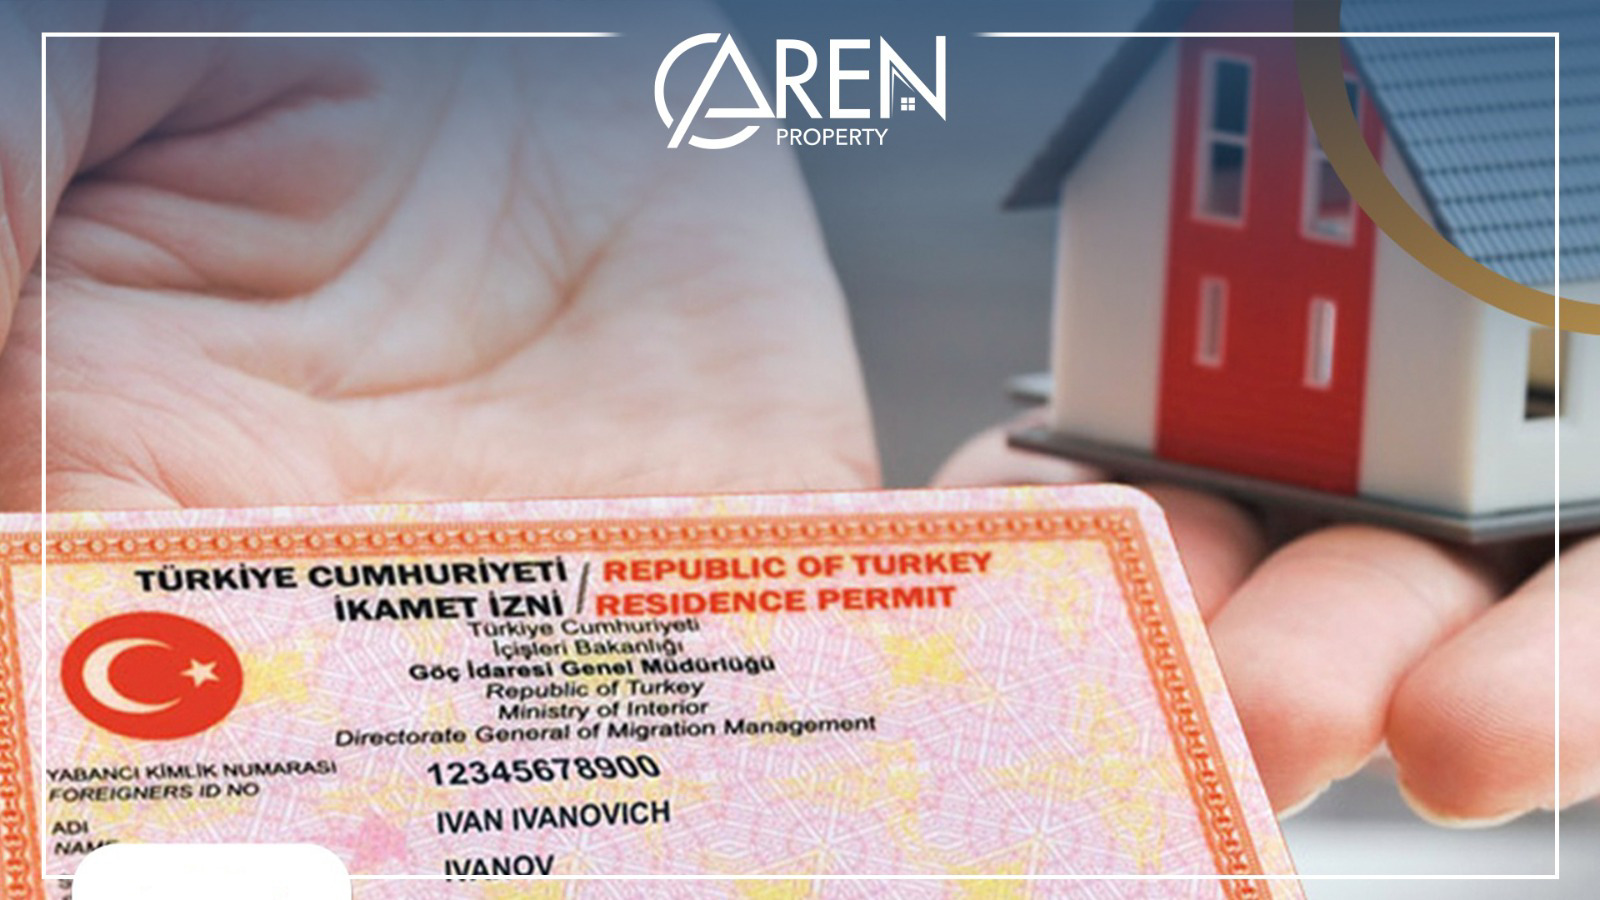 how-to-renew-the-real-estate-residence-permit-in-turkey-for-2022